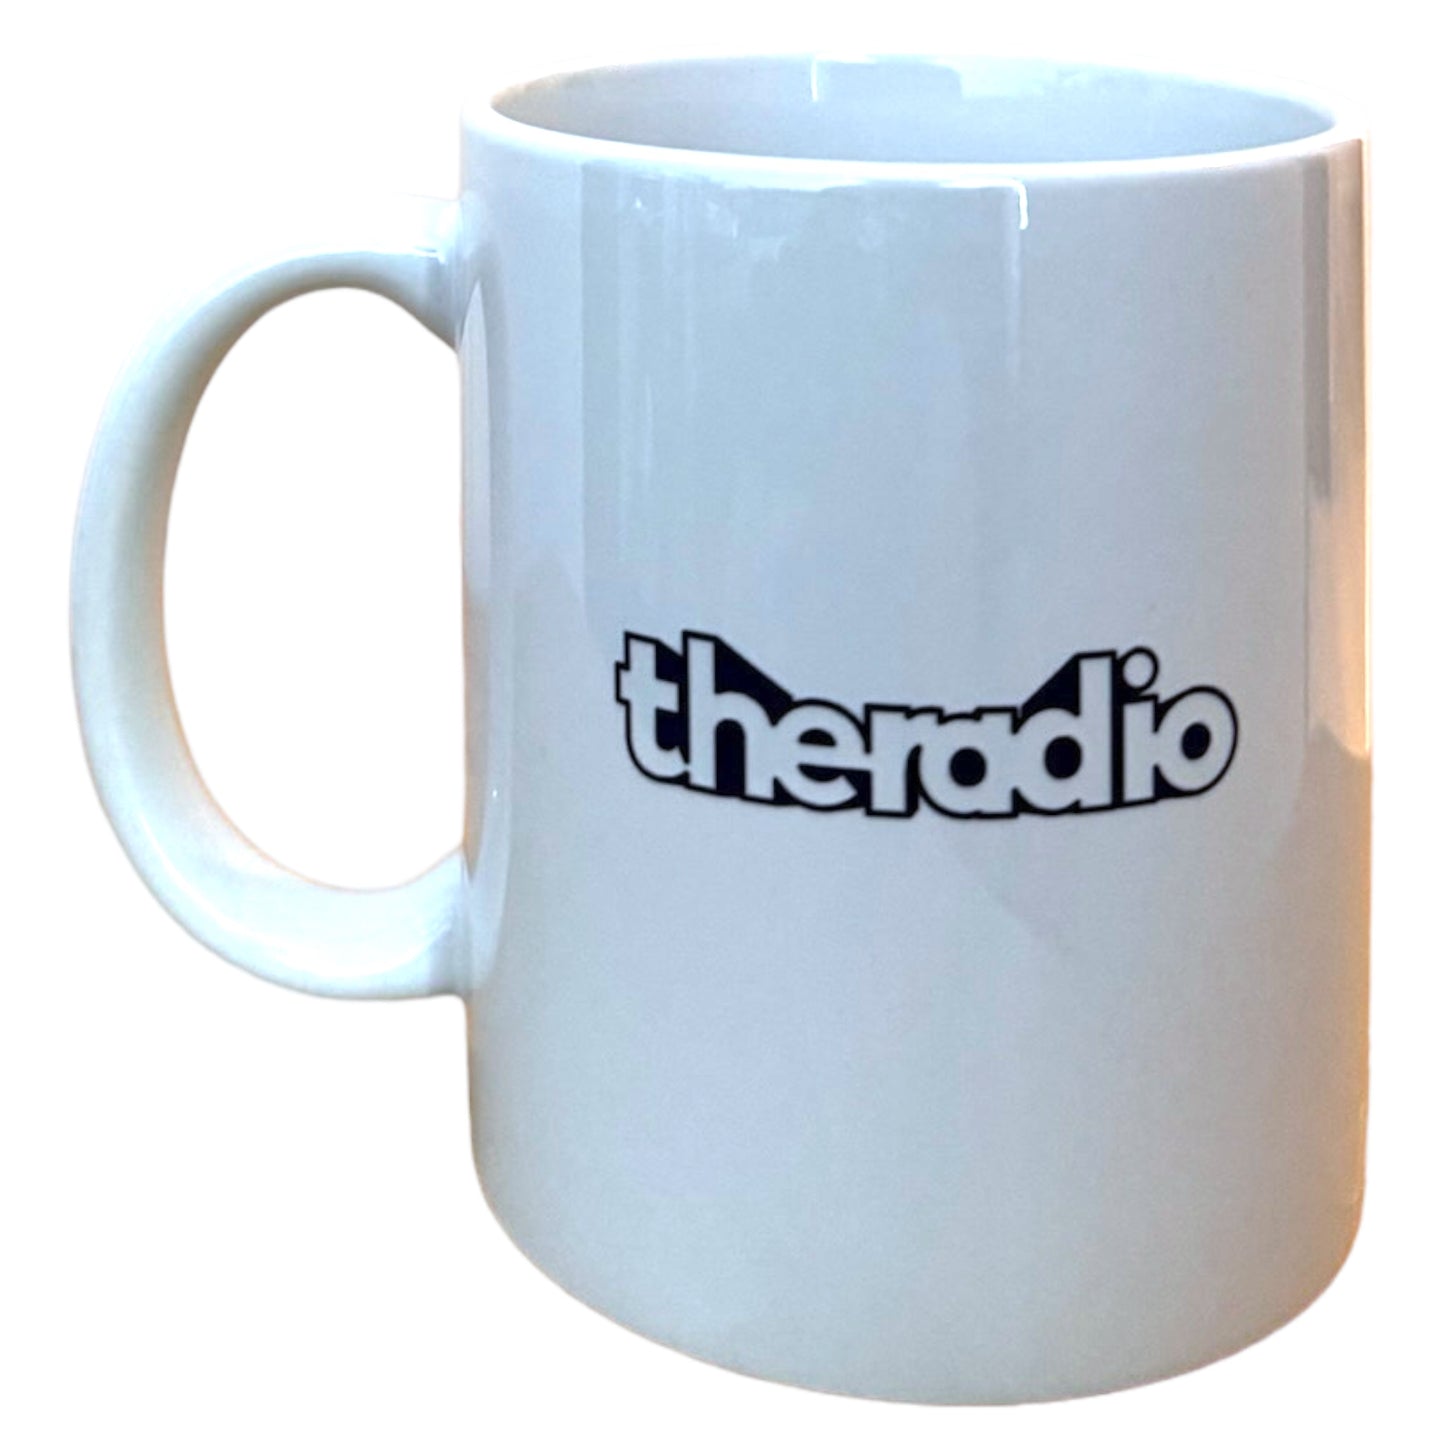 ★ TheRadio ～ WHEN I WAS YOUNG CUP ★